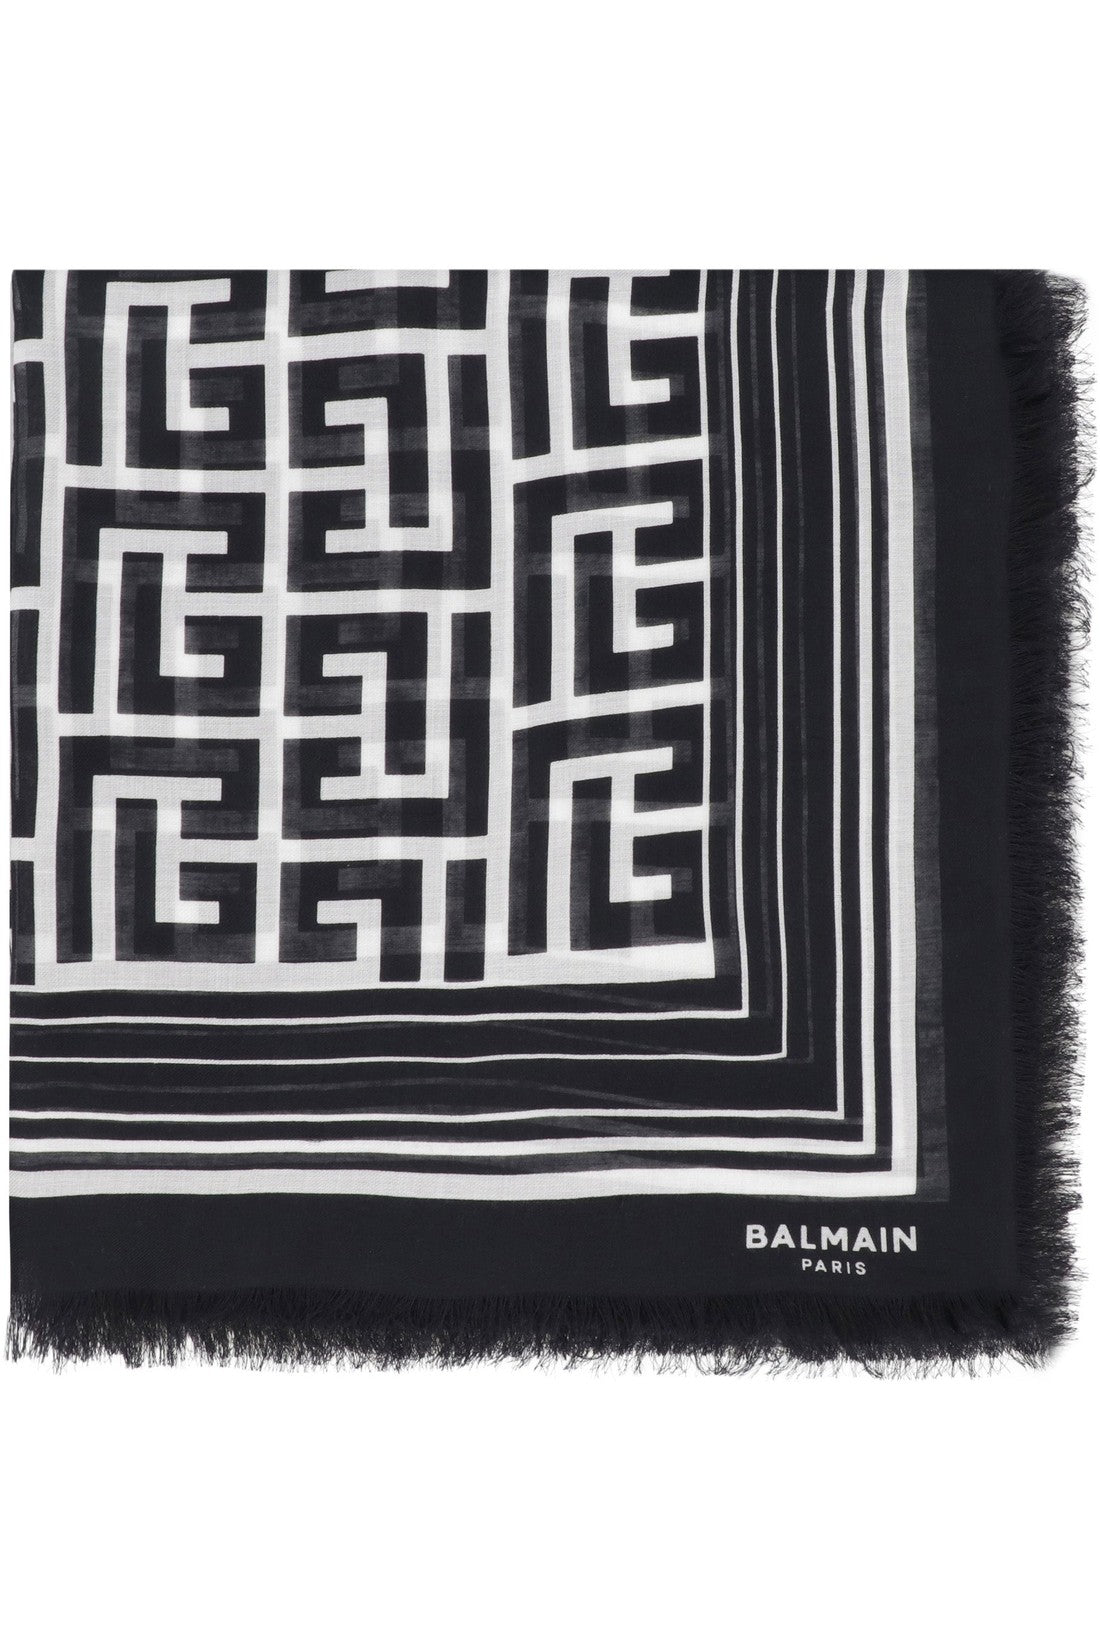 Balmain-OUTLET-SALE-Jacquard shawl with frayed edges-ARCHIVIST